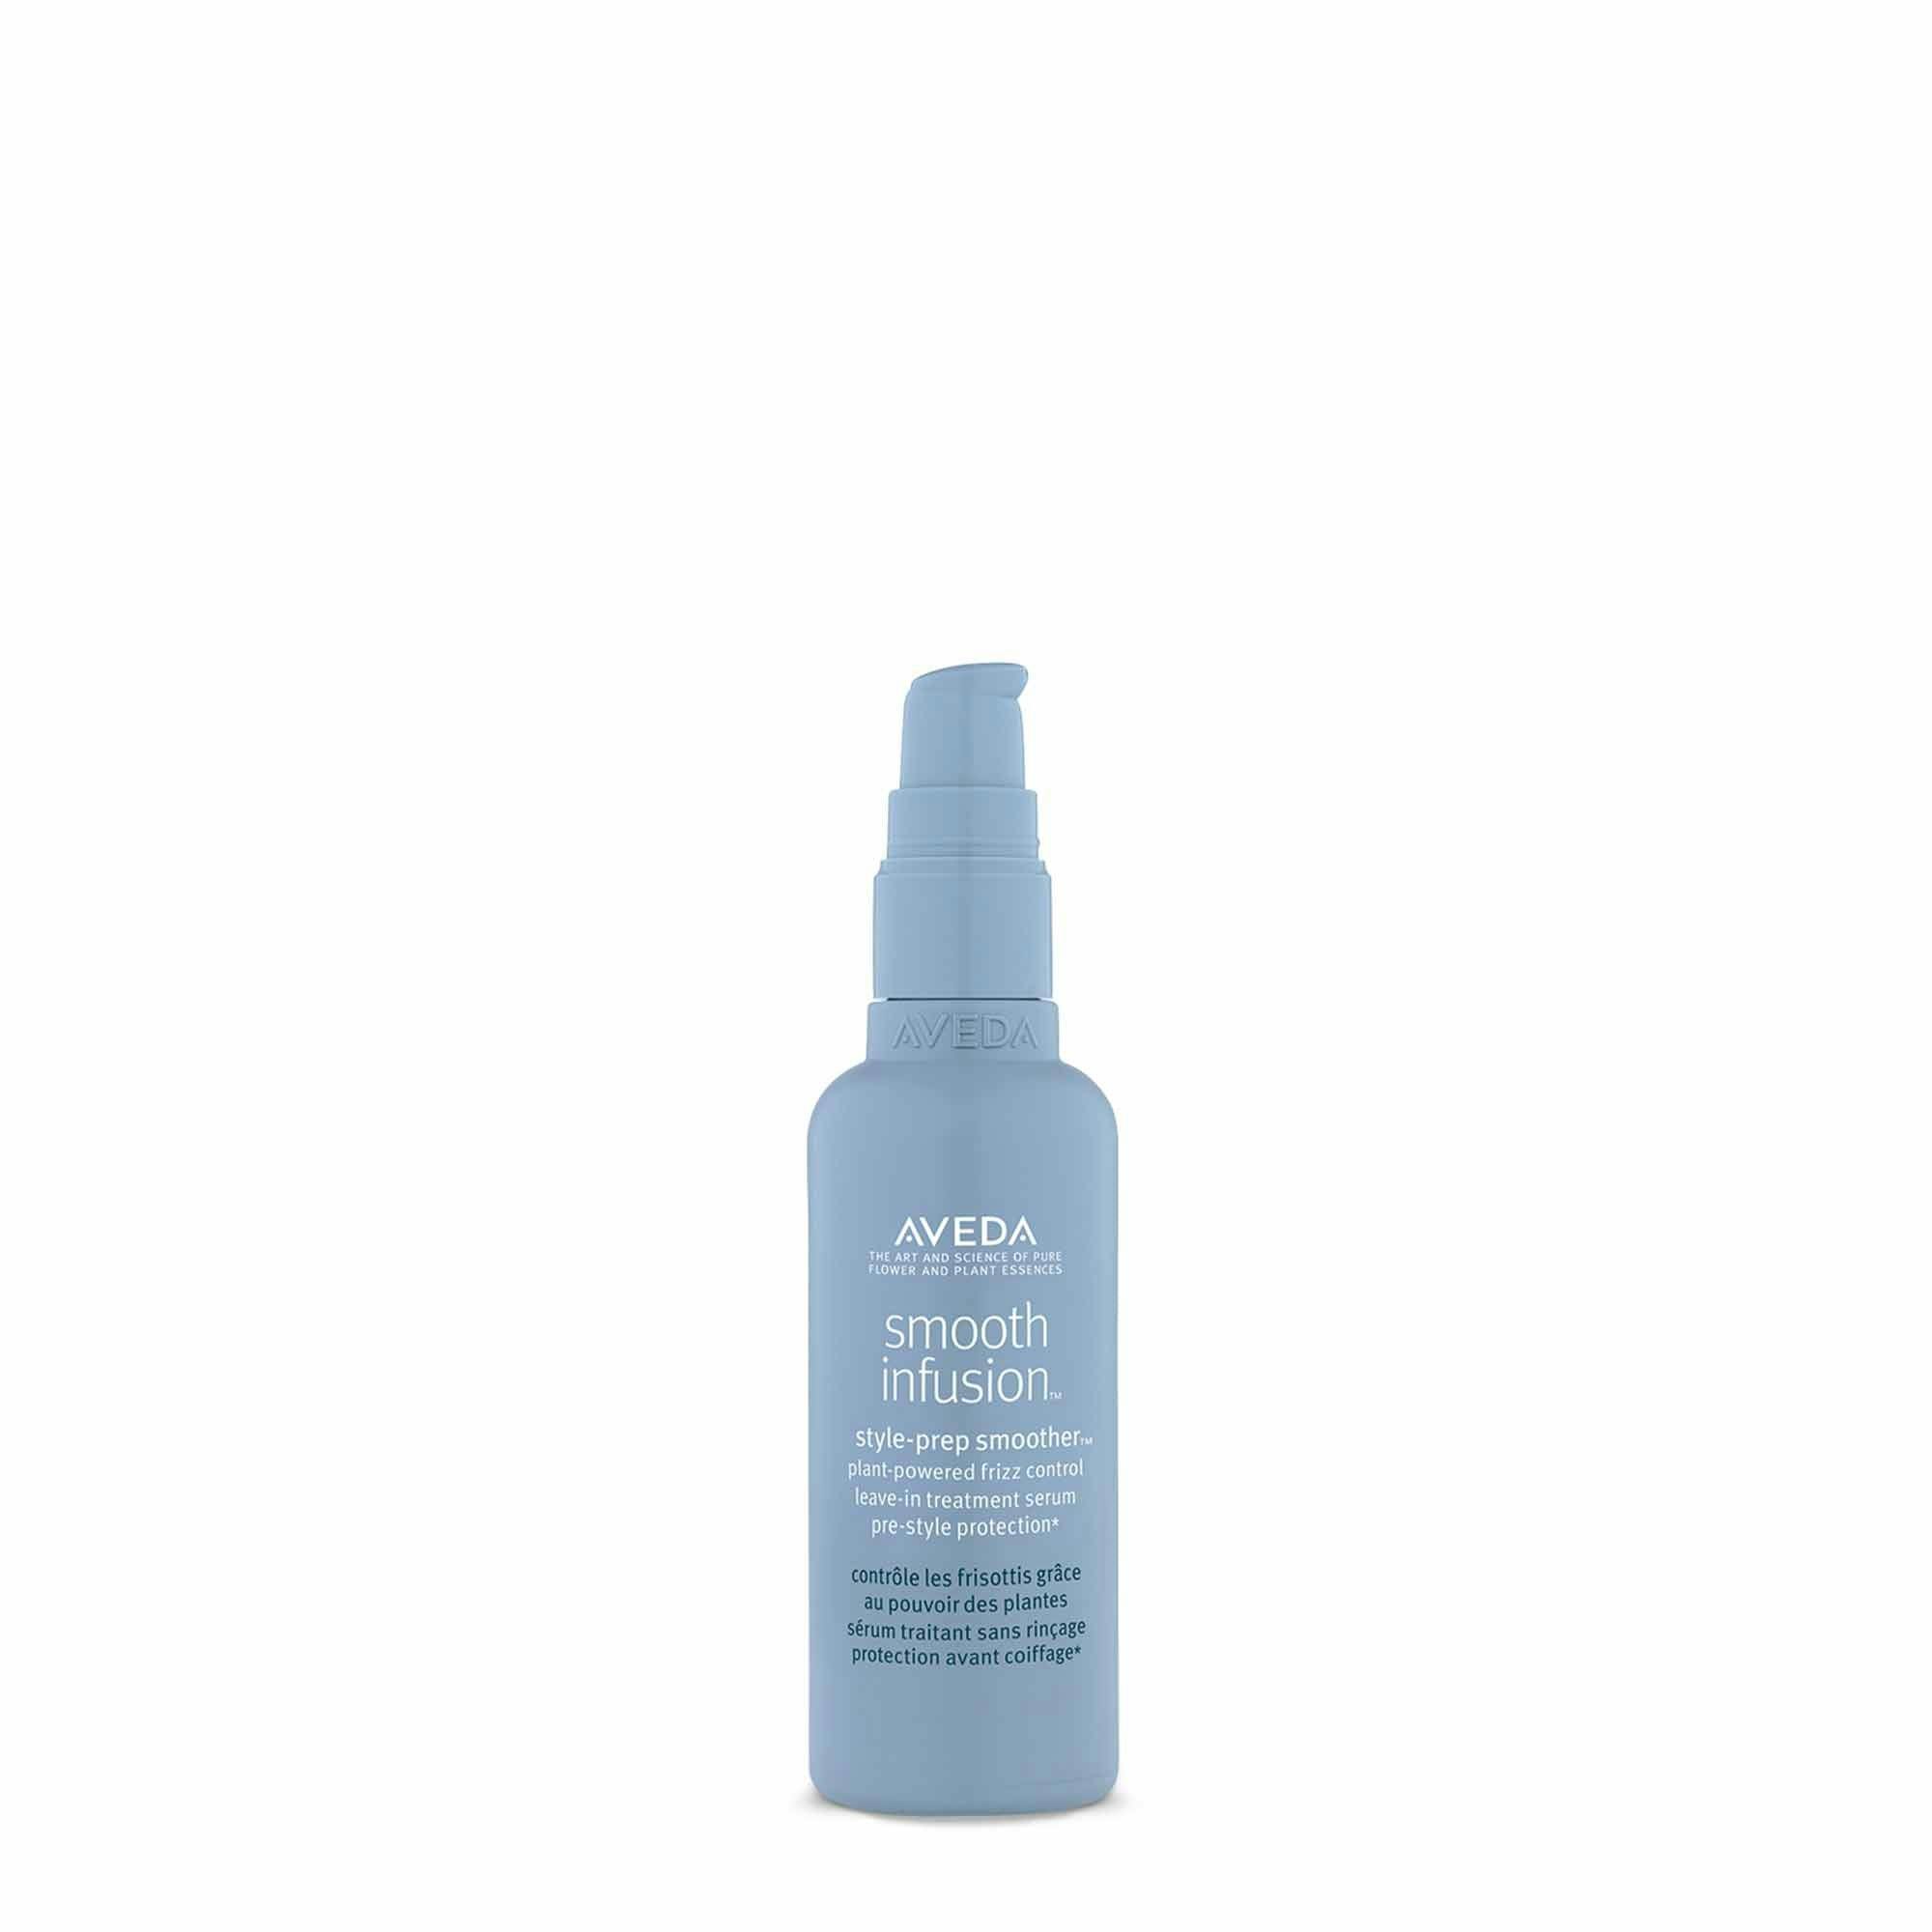 Aveda Smooth Infusion Style Prep Smoother 100ml